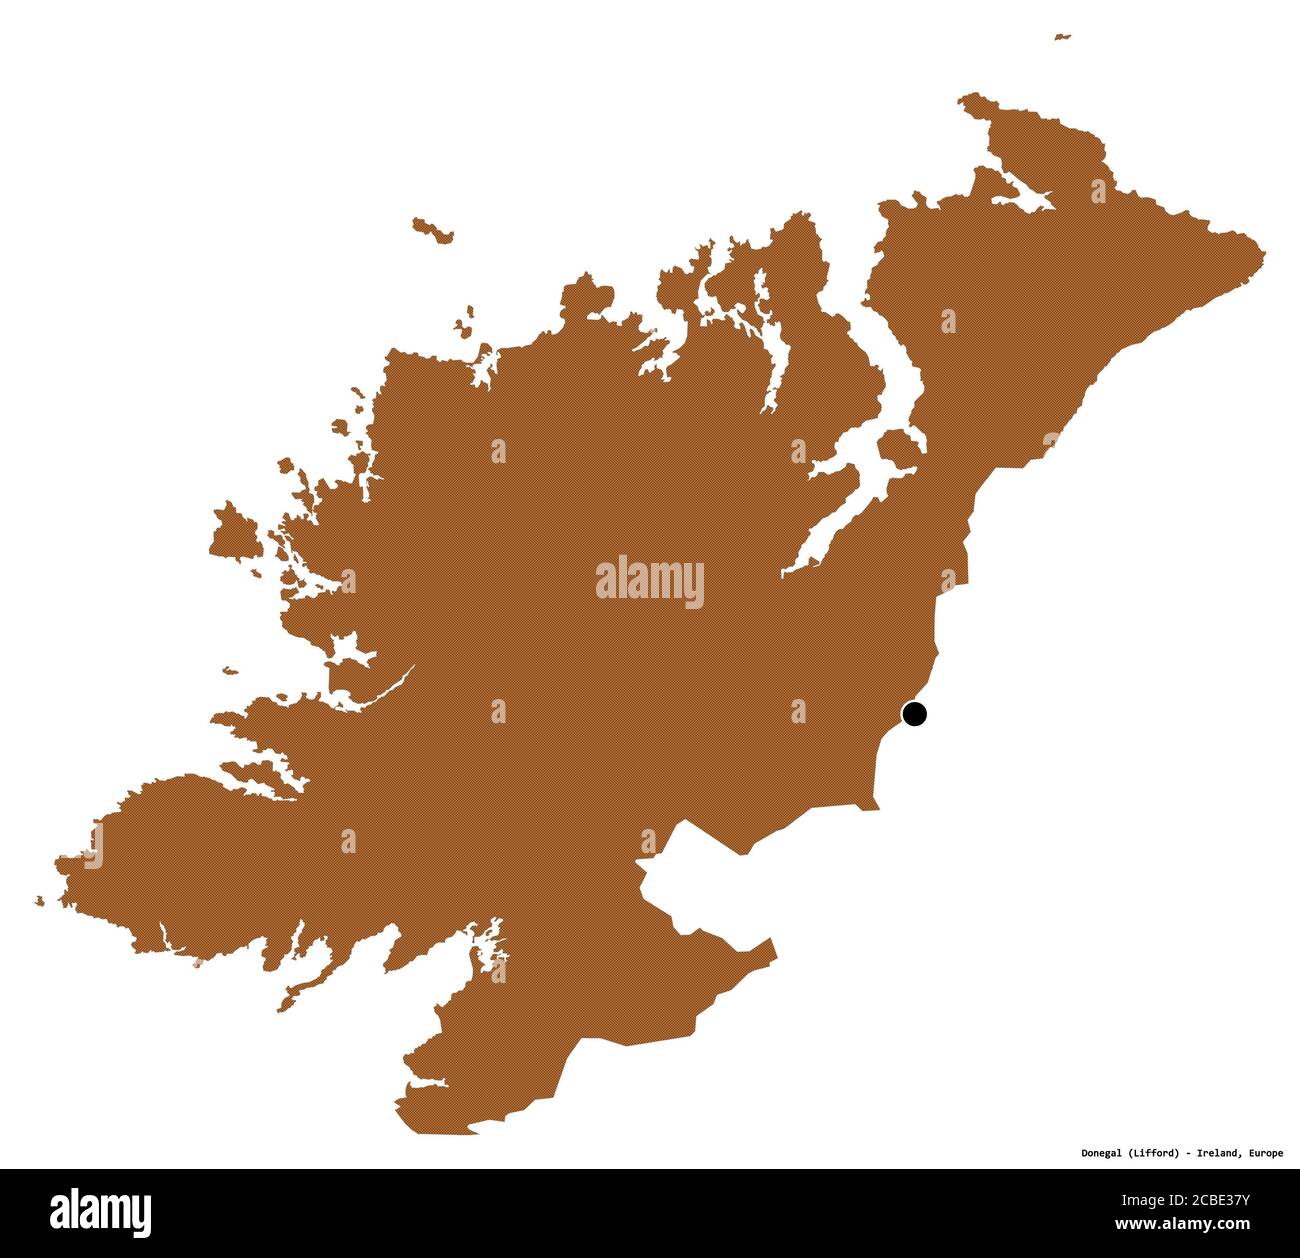 Shape of Donegal, county of Ireland, with its capital isolated on white background. Composition of patterned textures. 3D rendering Stock Photo